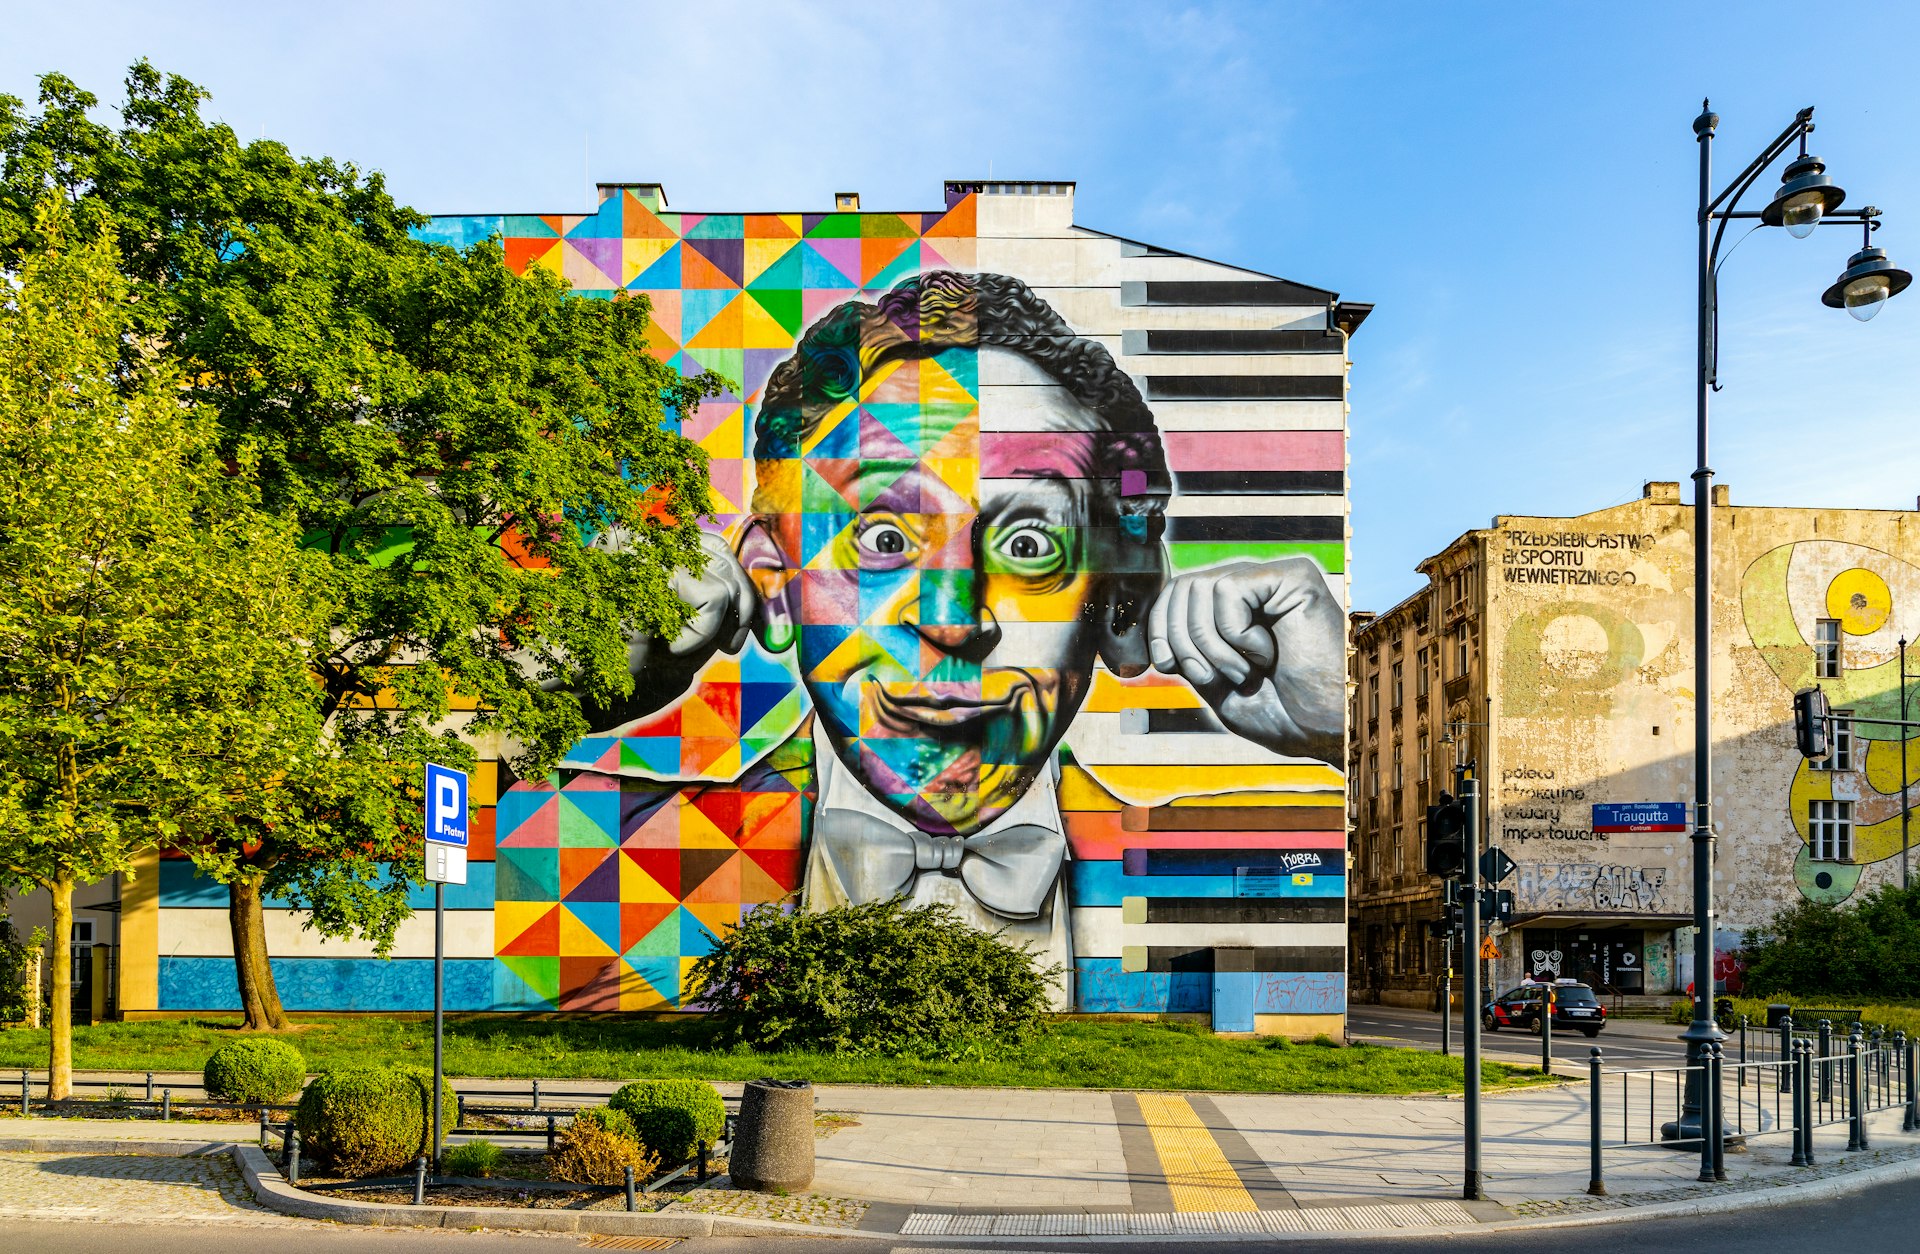 A colorful mural depicting a man pulling a funny face is painted on the side of a building in Łódź 